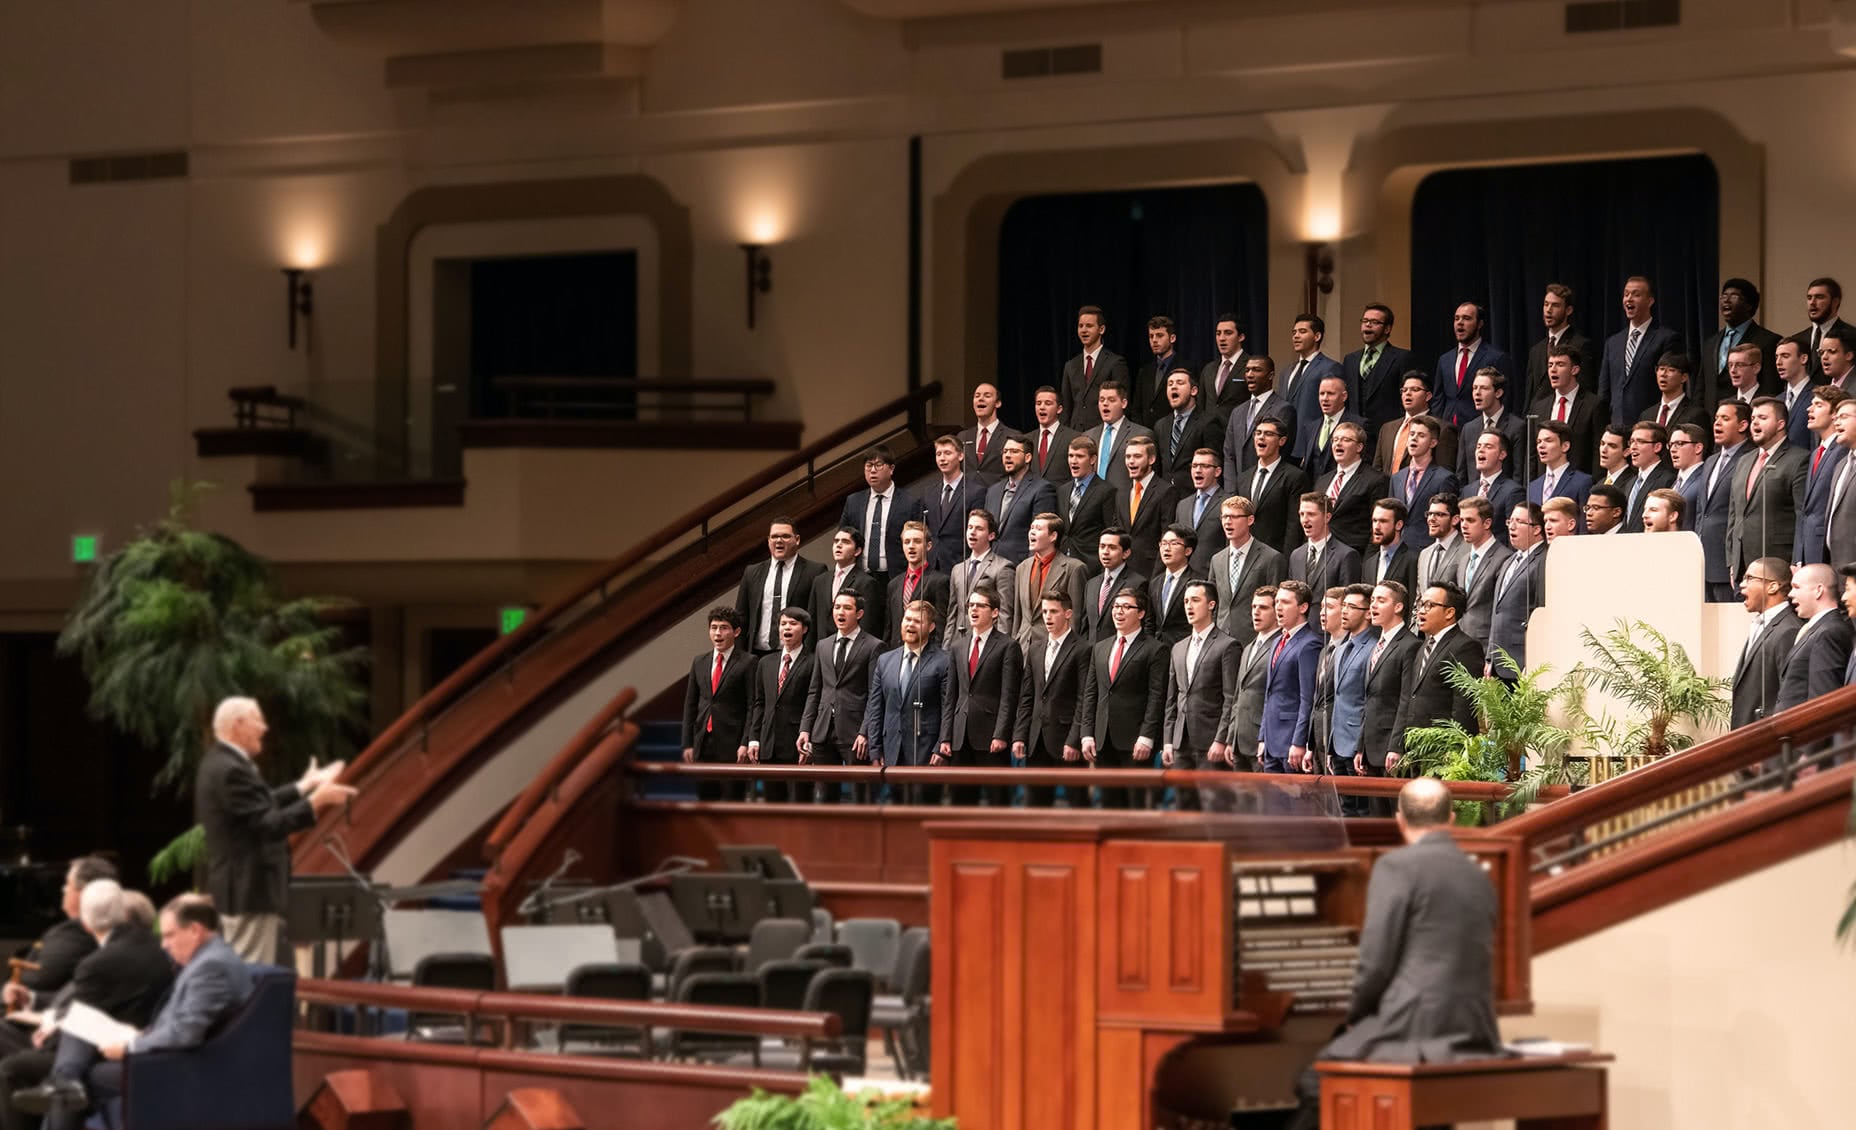 The Ministerial class singing A Few Good Men at Bible Conference